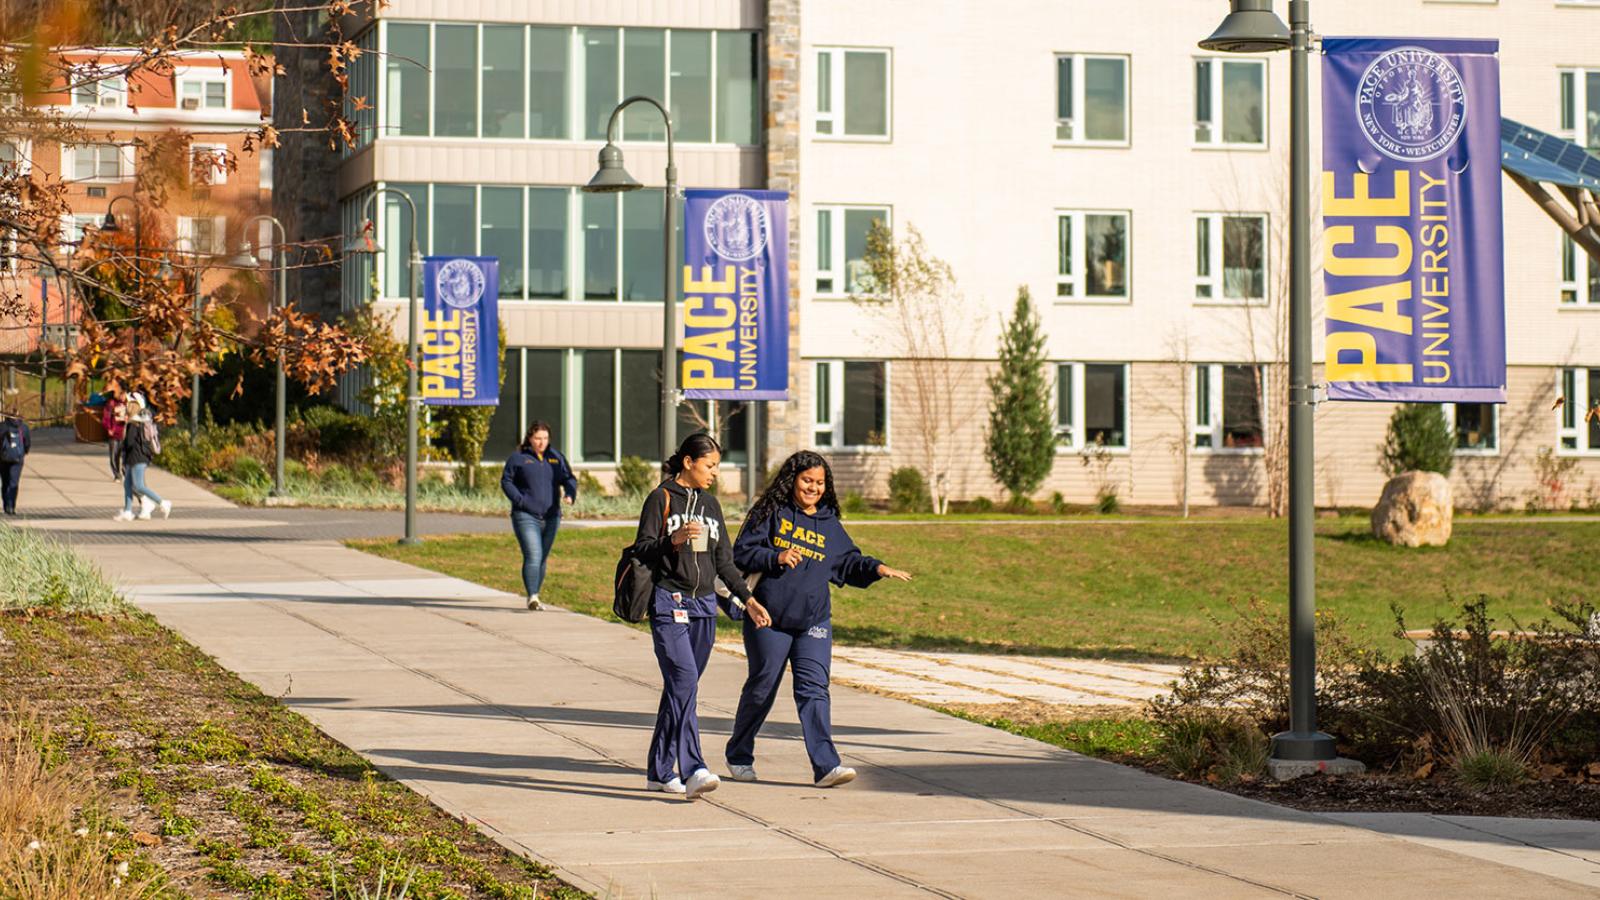 Students walking along a concrete path on the Pace University campus in Pleasantville, New York.